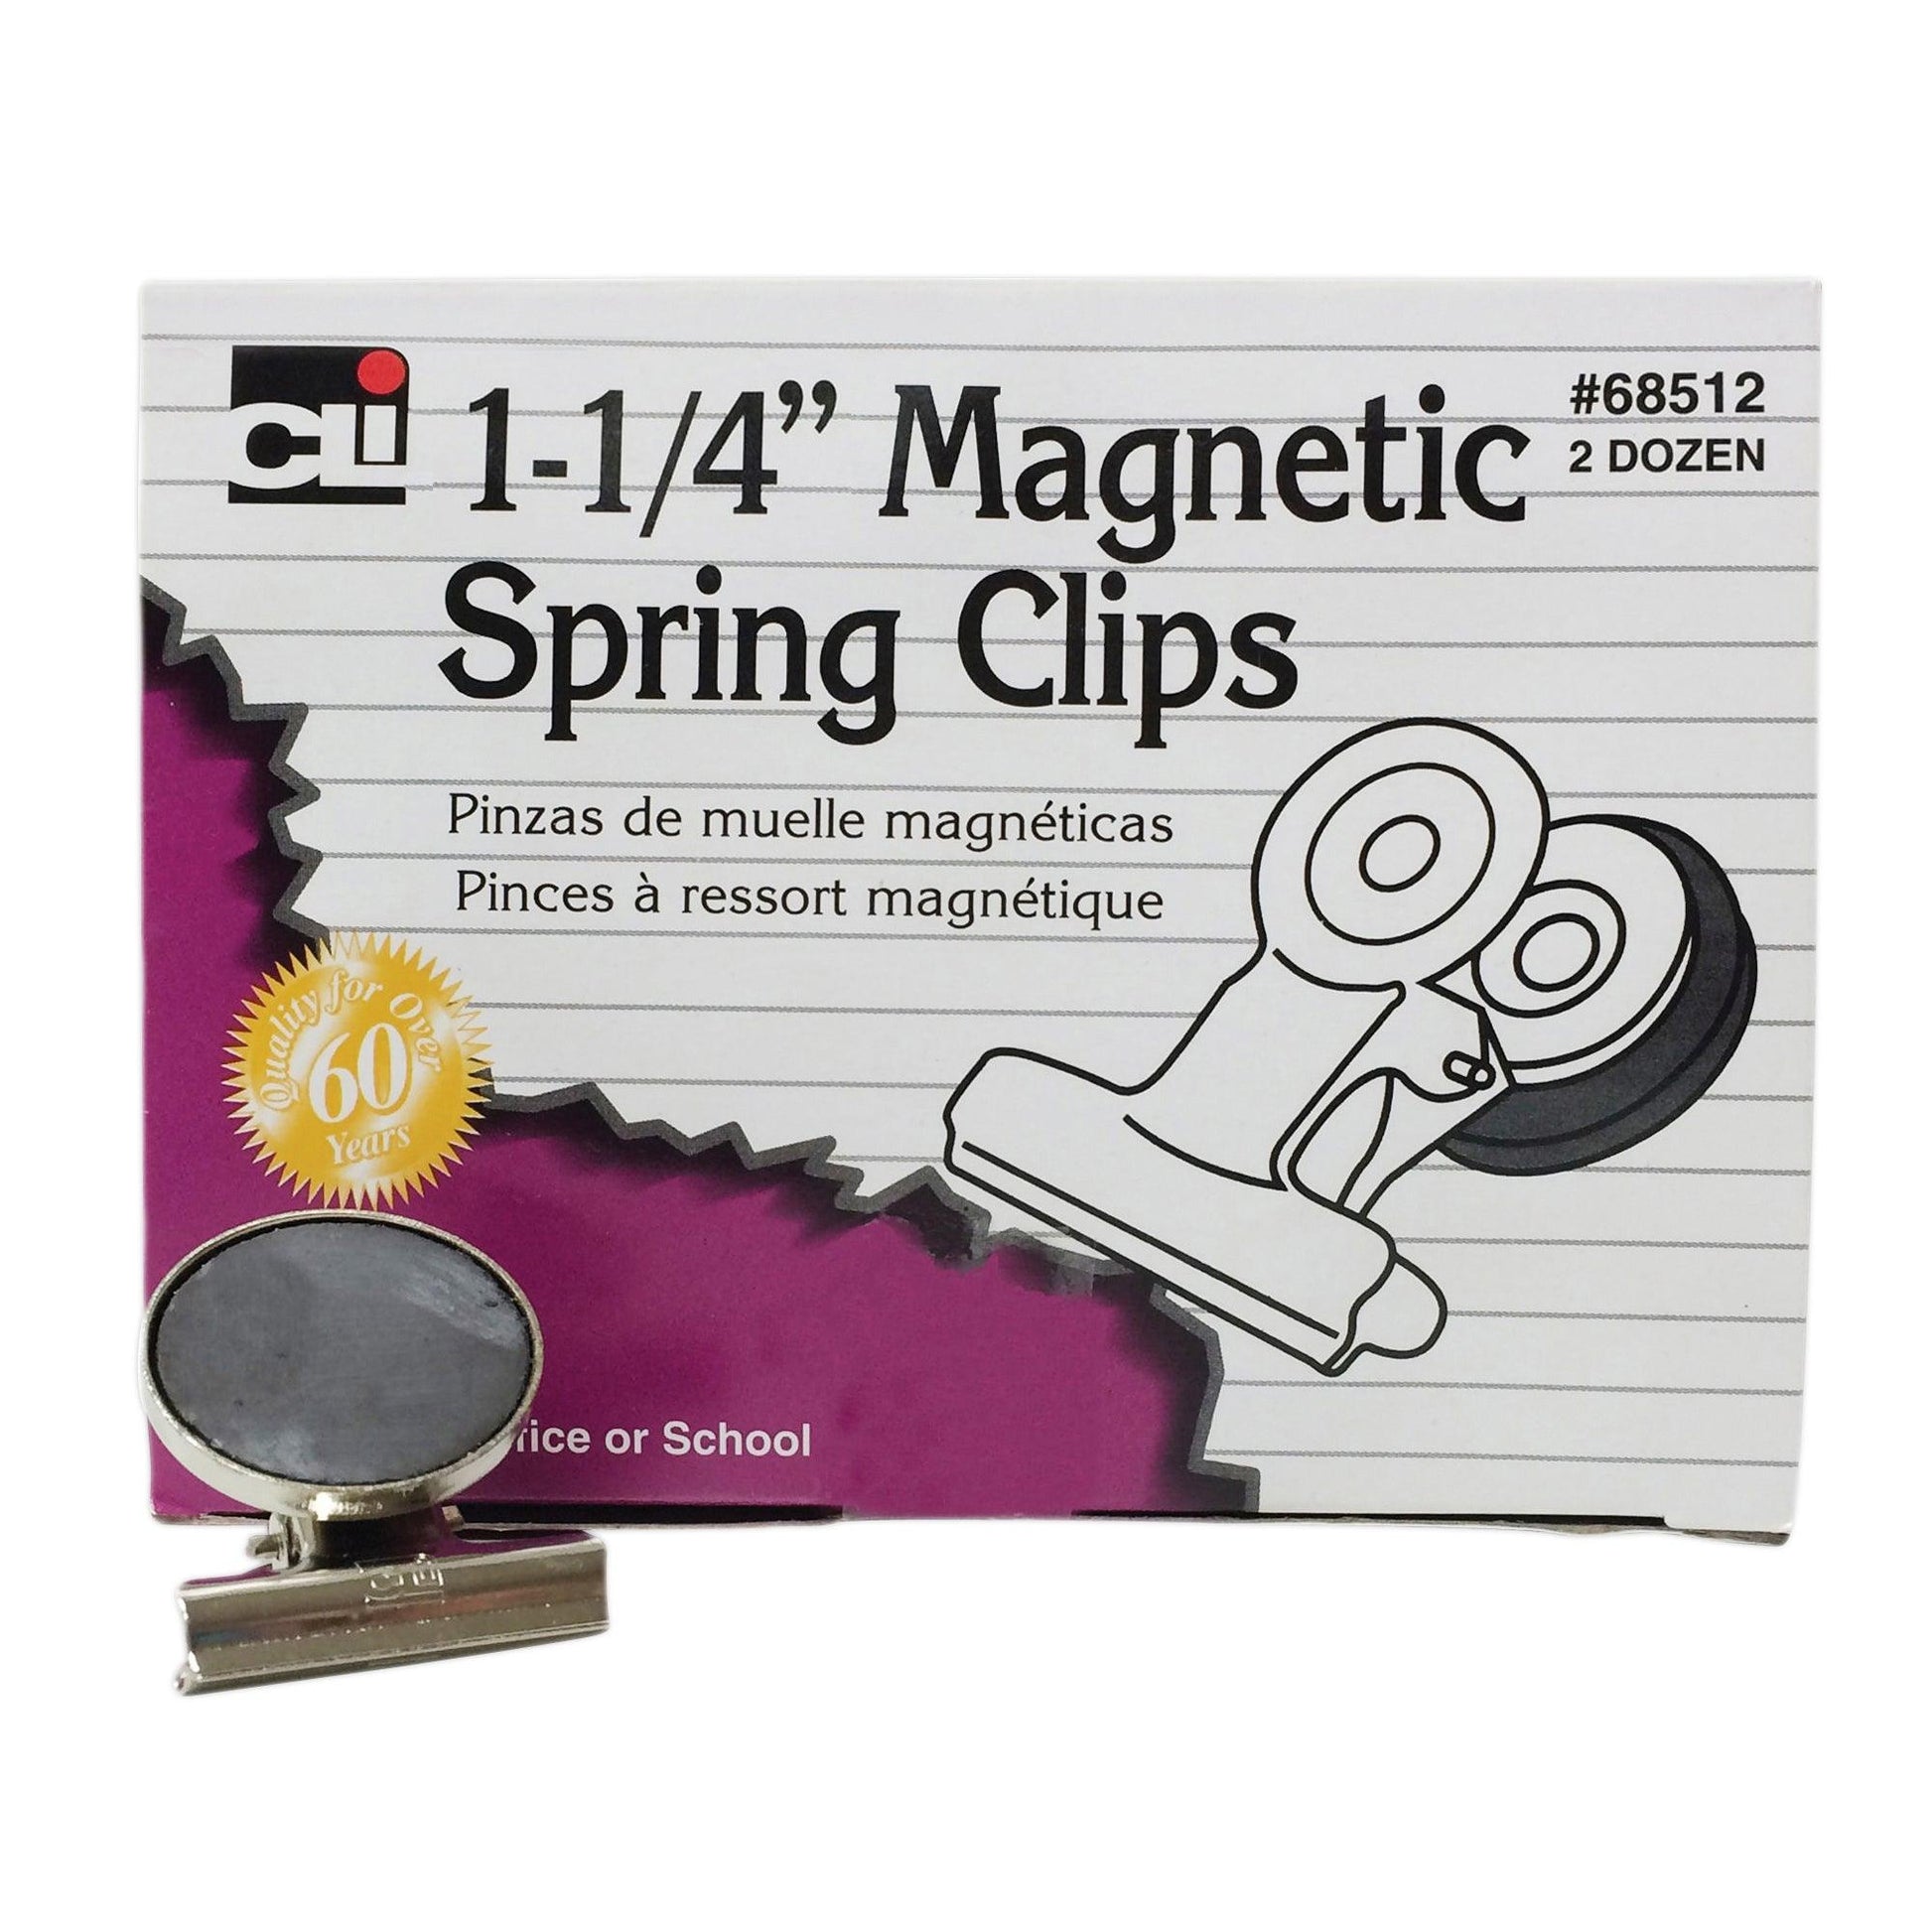 Magnetic Spring Clips, 1-1/4", Box of 24 - Loomini